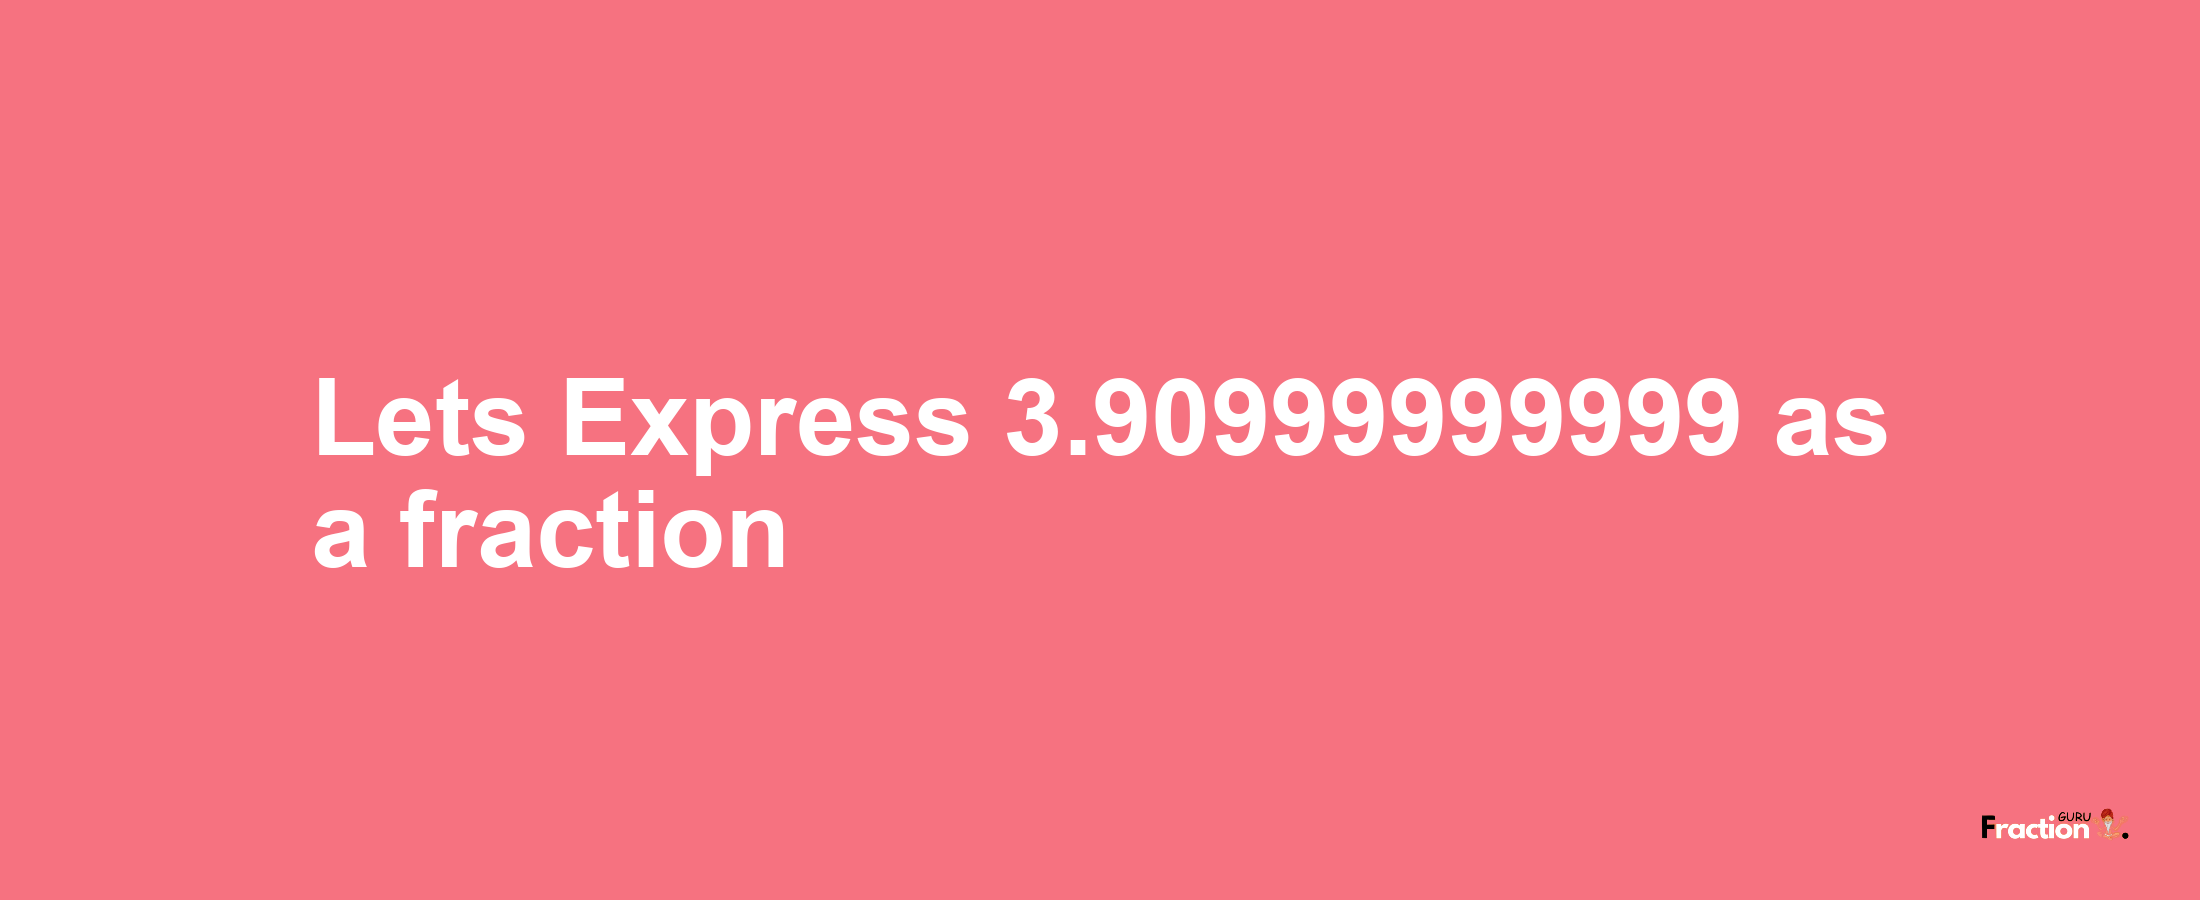 Lets Express 3.90999999999 as afraction